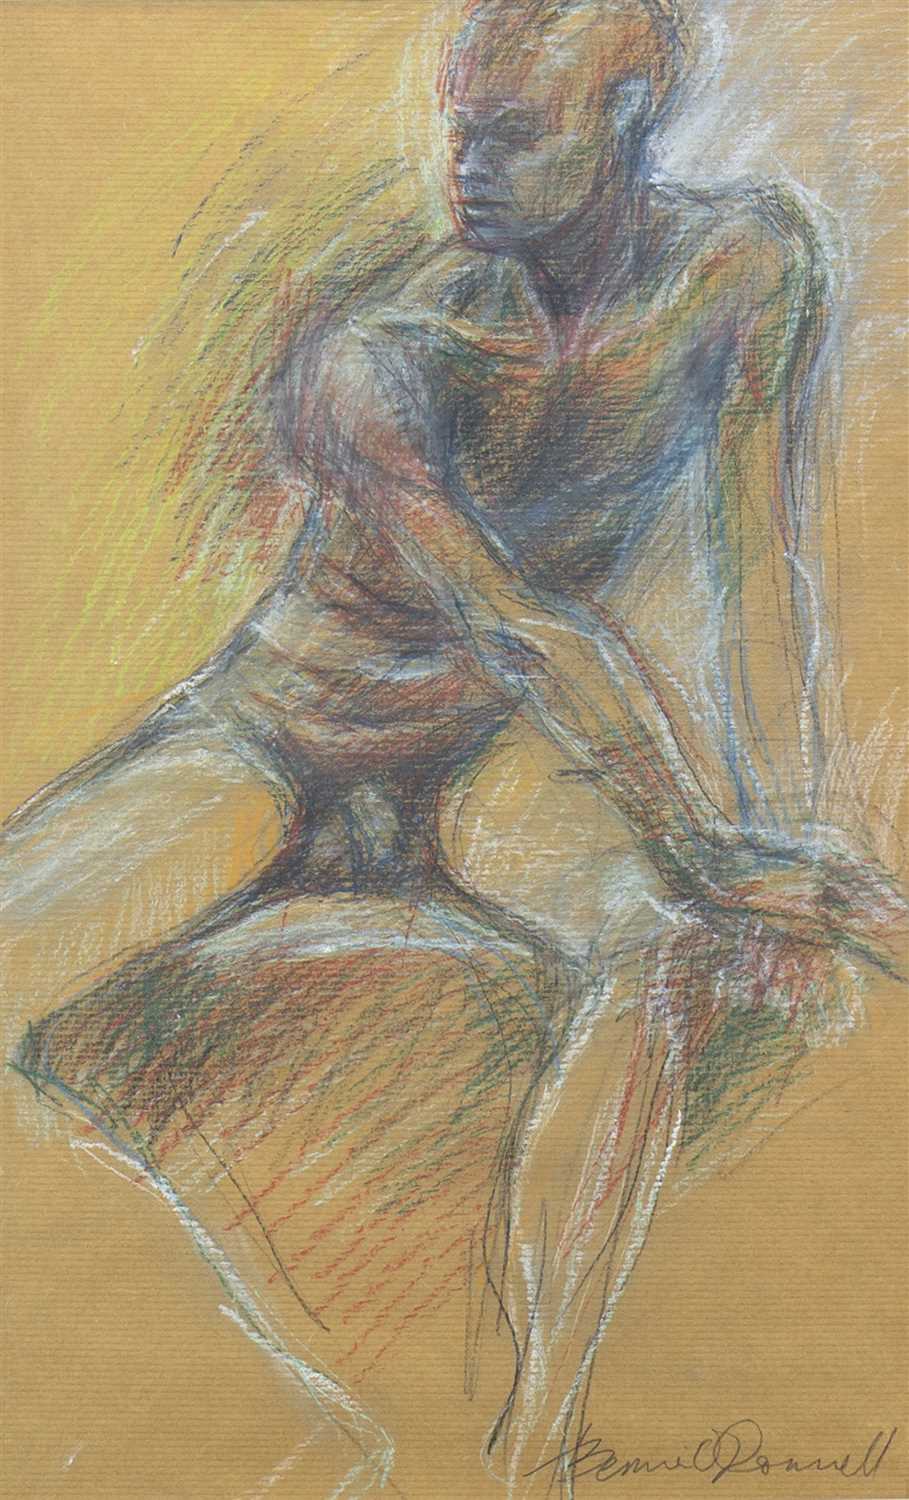 Lot 570 - NUDE STUDY, A PASTEL BY BERNIE O'DONNELL